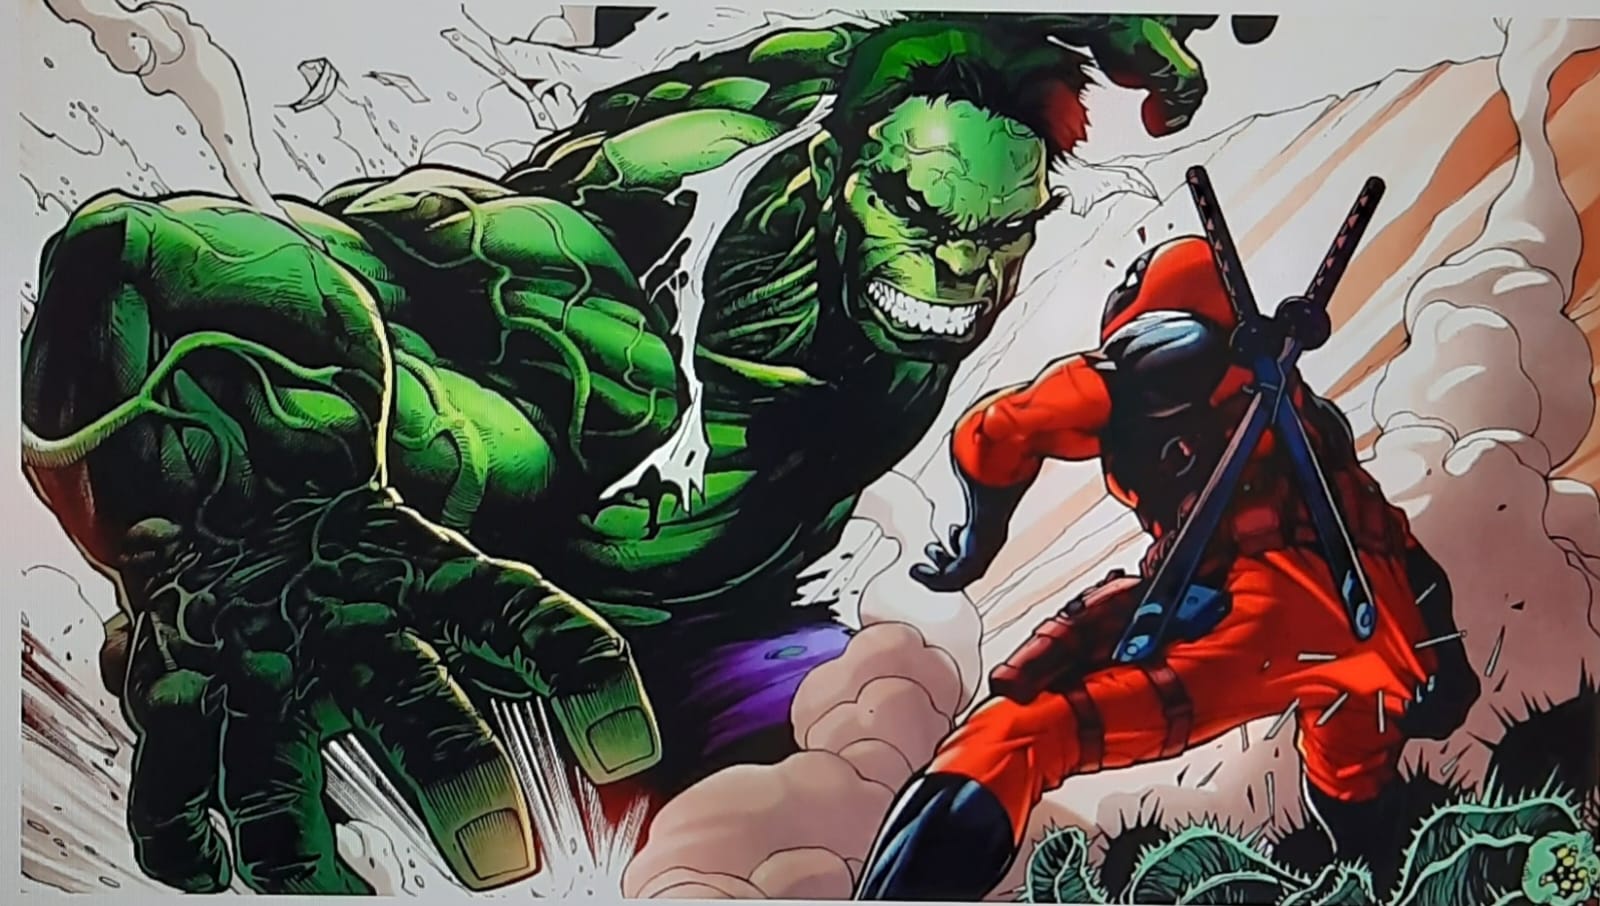 Hulk and Deadpool have had an epic battle in the comics